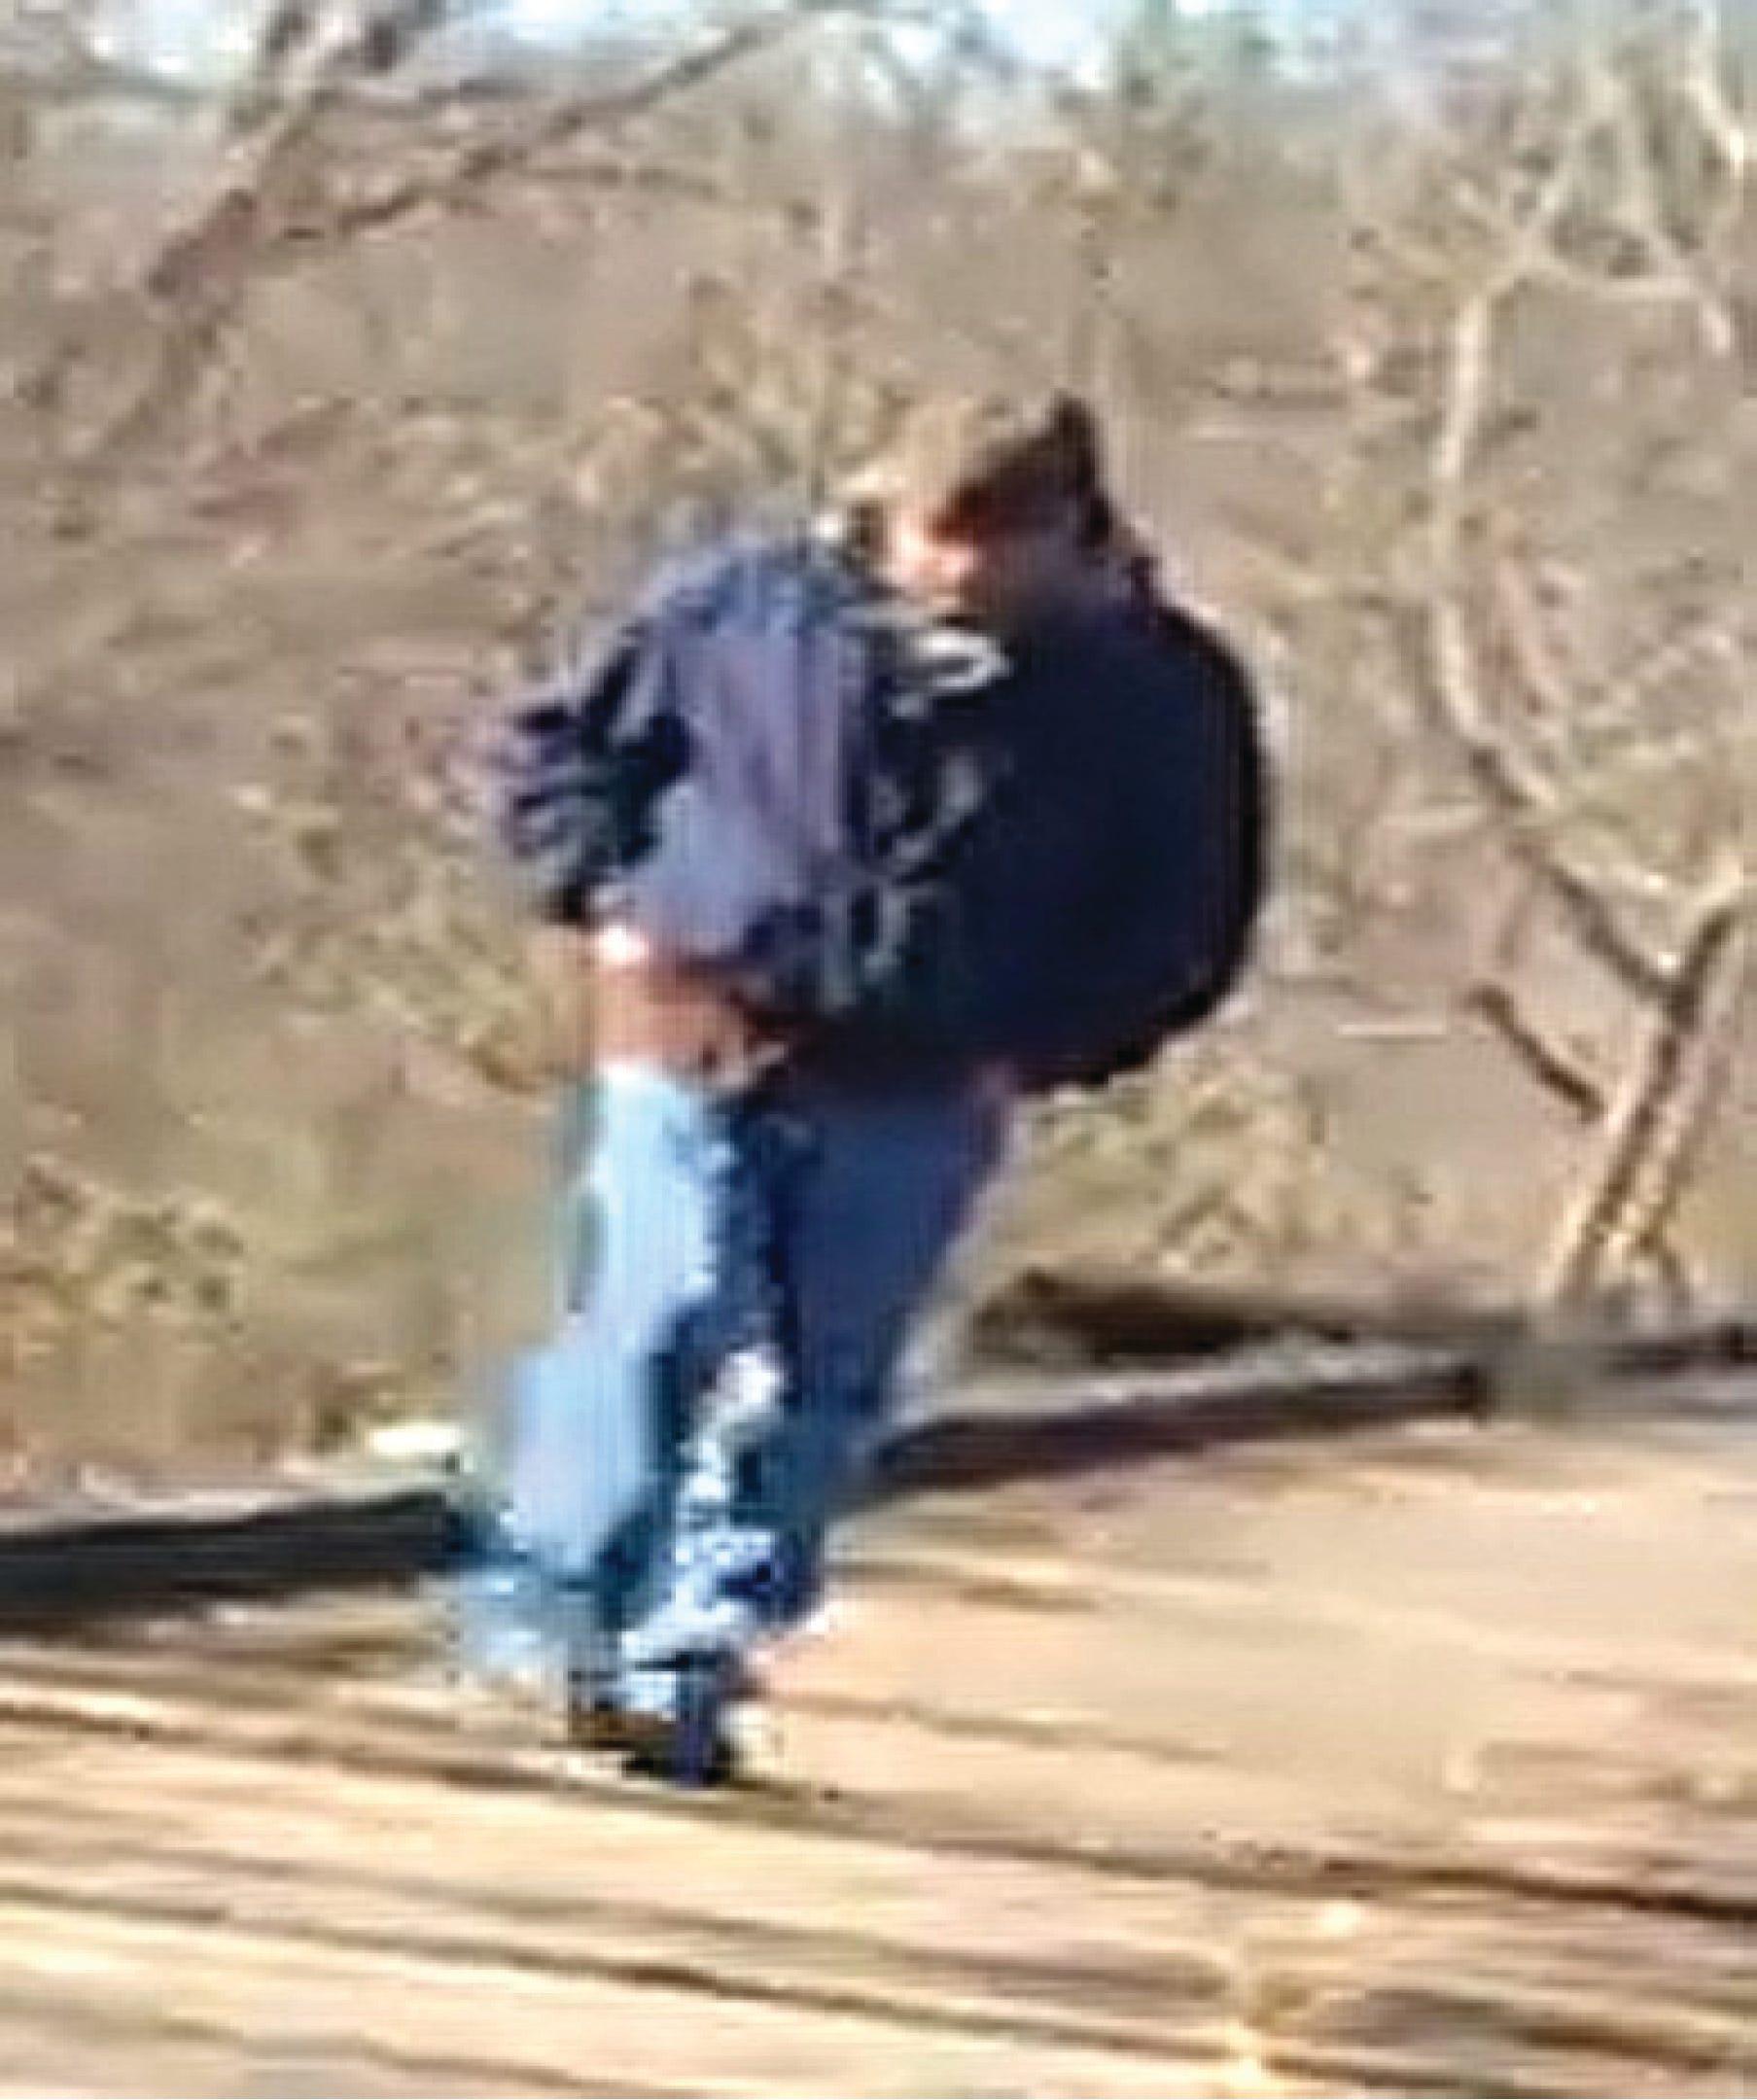 Photo taken by murder victim Libby German of her alleged murderer. He remains unidentified.
On February 14, 2017, the bodies of Abigail Williams and Liberty German were discovered near the Monon High Bridge Trail, which is part of the Delphi Historic Trails in Delphi, Indiana, United States, after the young girls had disappeared from the same trail the previous day. The murders have received significant media coverage because a video and audio recording of an individual believed to be the girls’ killer were found on German’s smartphone. Despite thousands of tips that have been sent to the police and the circulation of the recordings of the suspect, no arrest in the case has been made.